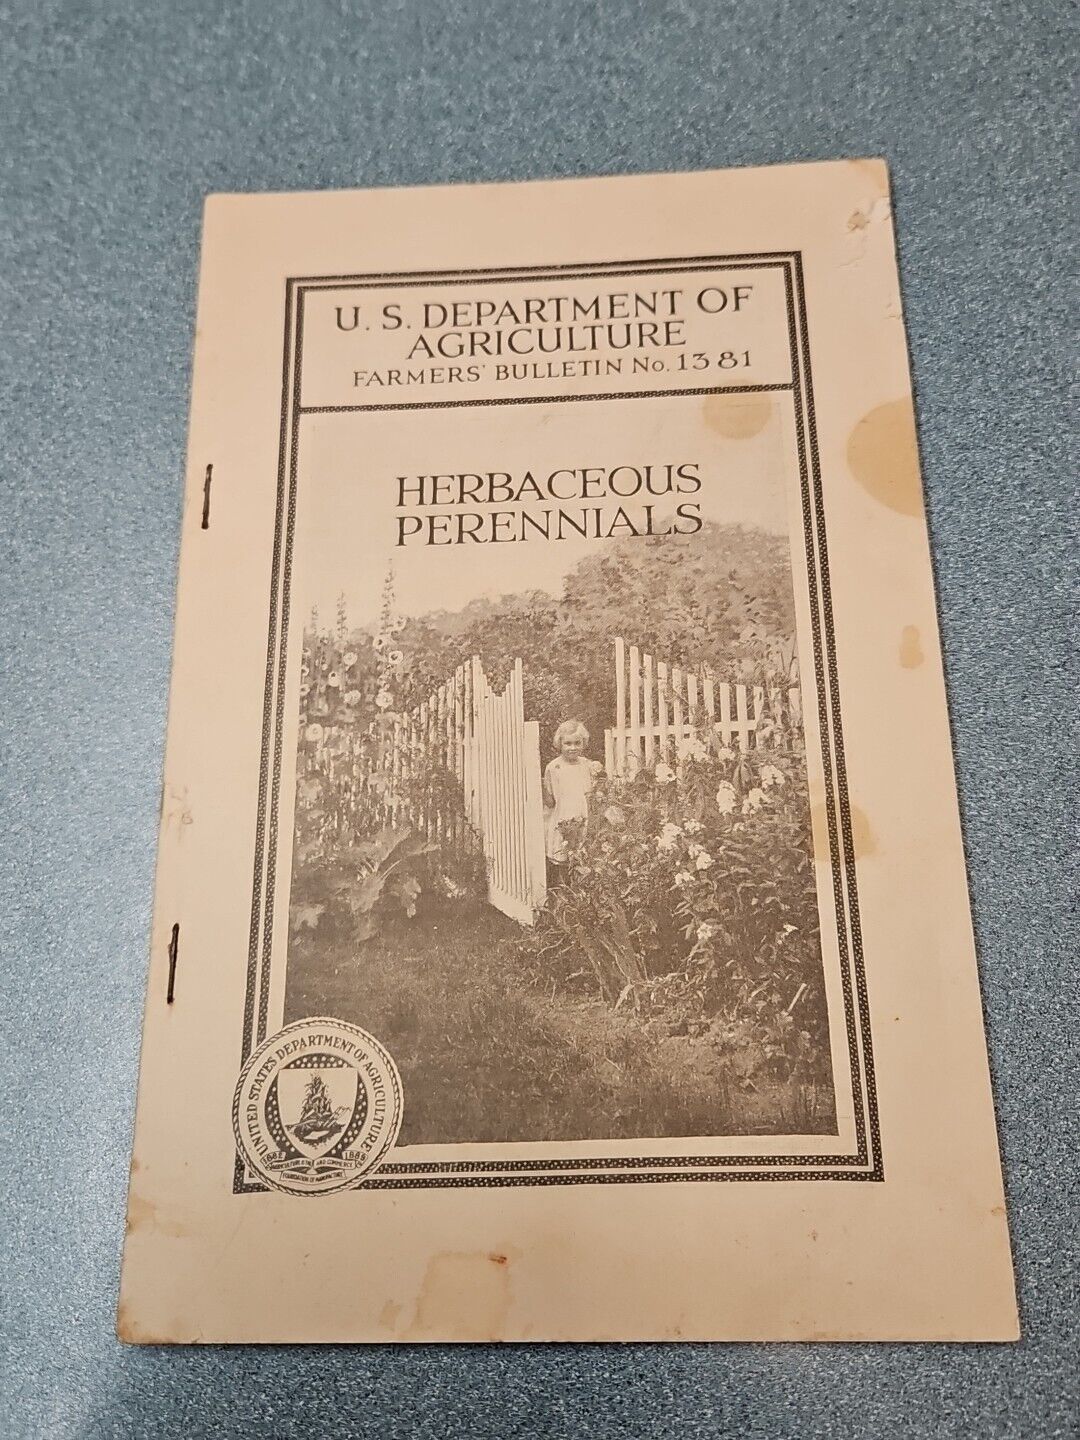 Department of Agriculture Herbaceous Perennials 1929